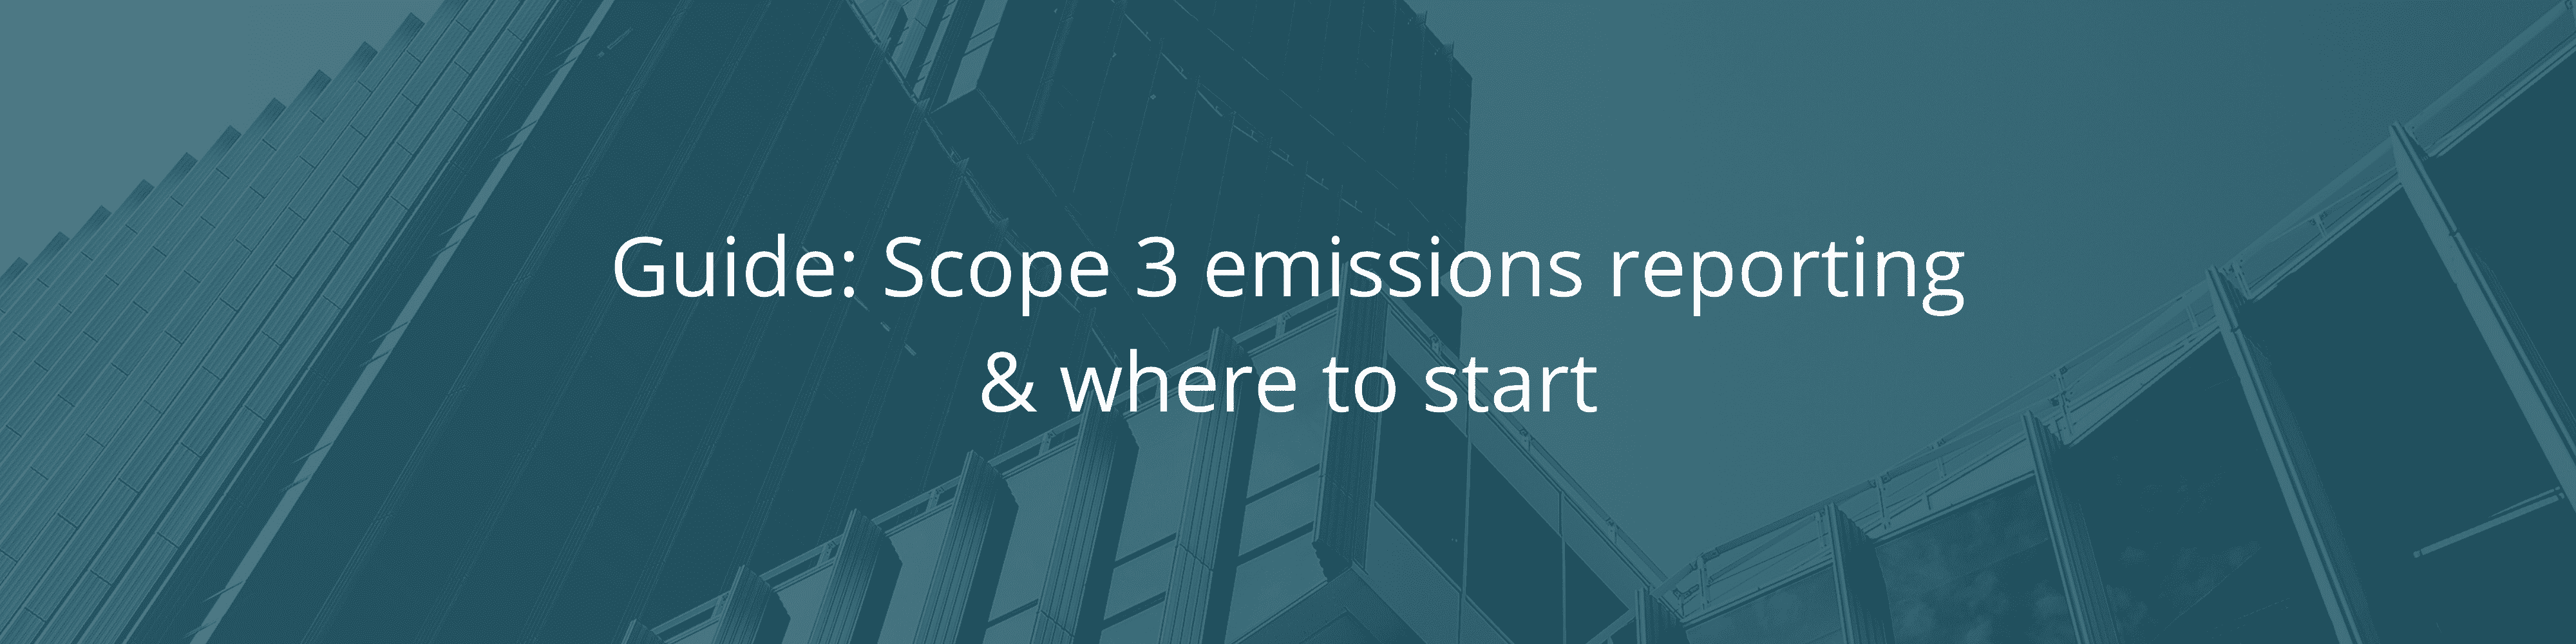 Scope 3 emissions reporting & where to start